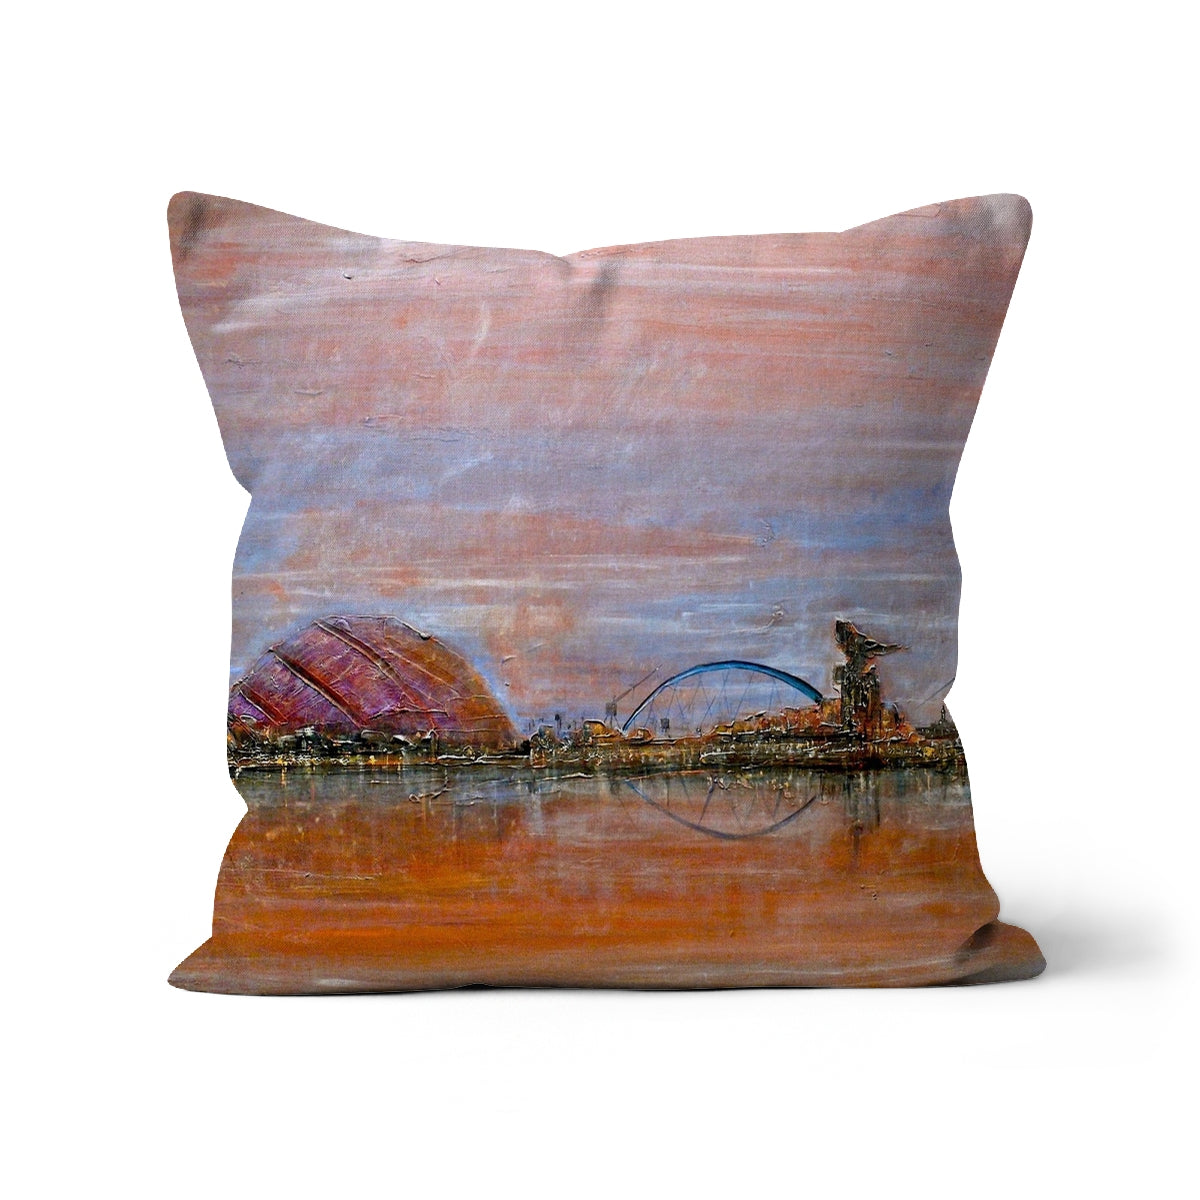 Glasgow Harbour Art Gifts Cushion-Cushions-Edinburgh & Glasgow Art Gallery-Canvas-22"x22"-Paintings, Prints, Homeware, Art Gifts From Scotland By Scottish Artist Kevin Hunter